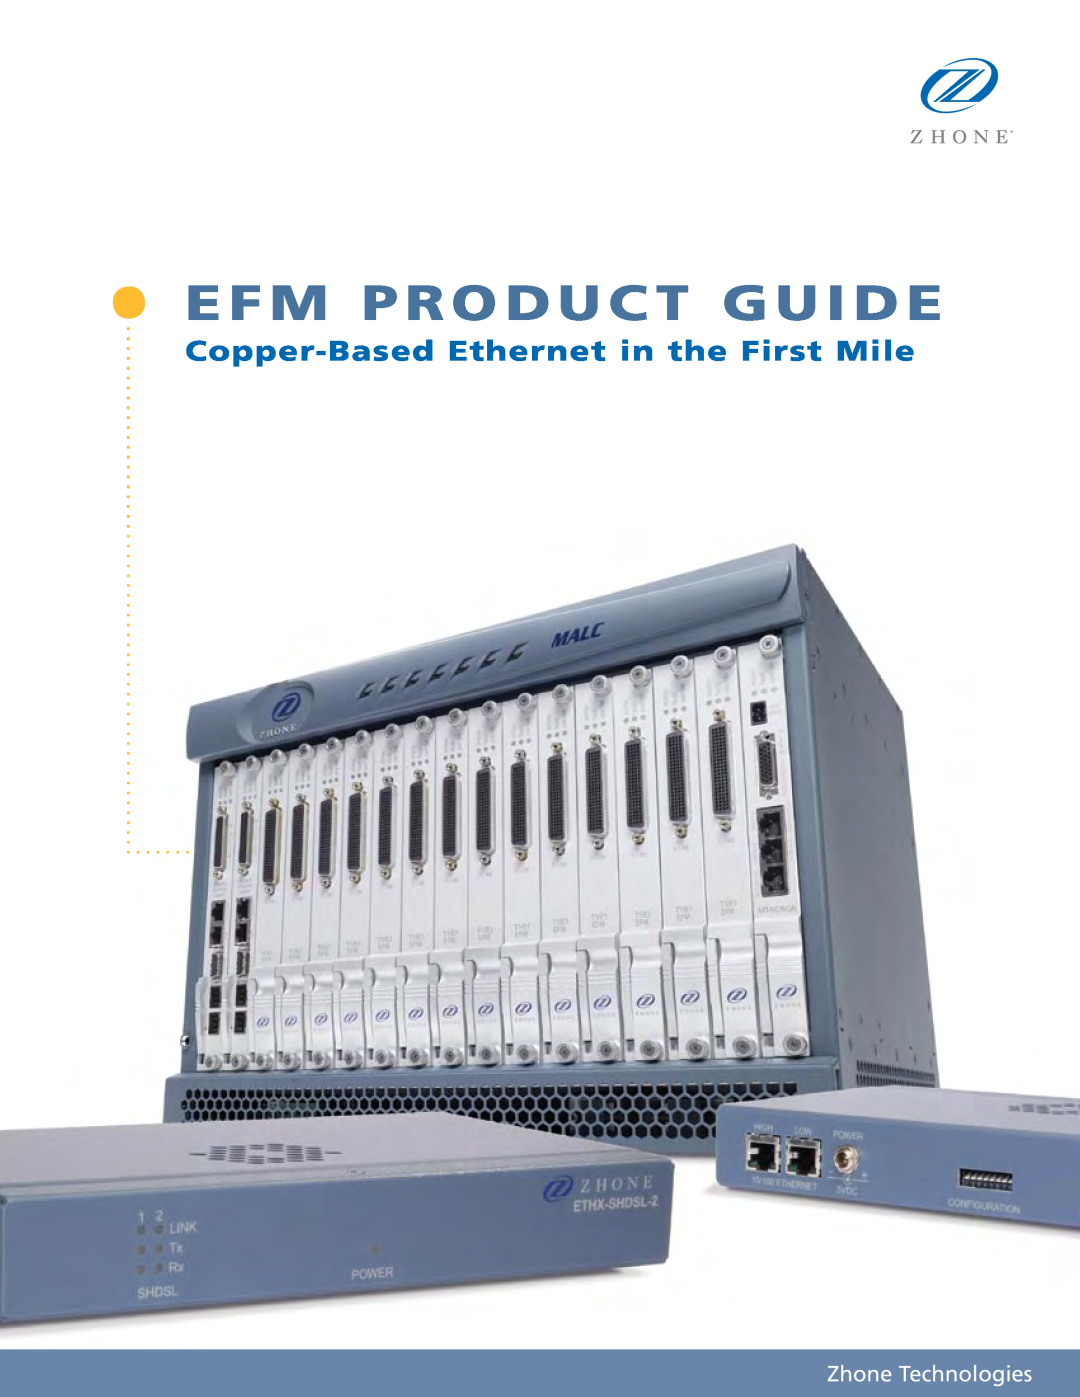 Zhone Technologies manual Copper-Based Ethernet in the First Mile, Efm Product Guide, Zhone Technologies 